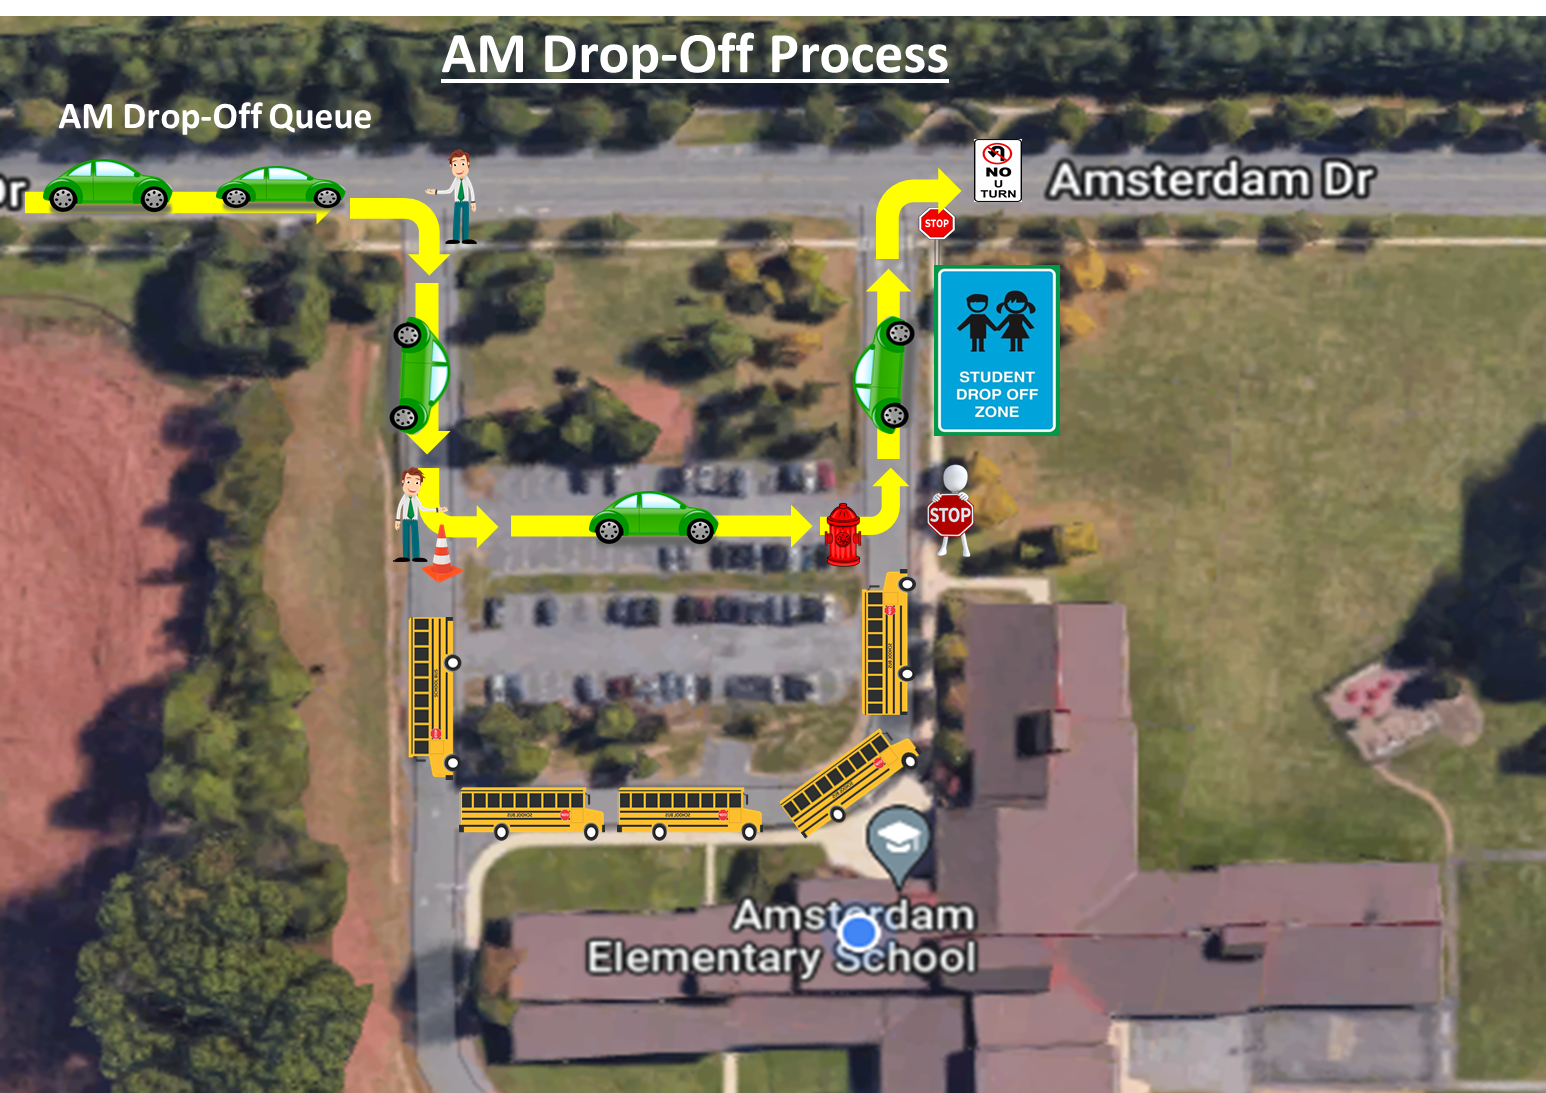 am drop off process image with arrow of cars doing through the school parking lot